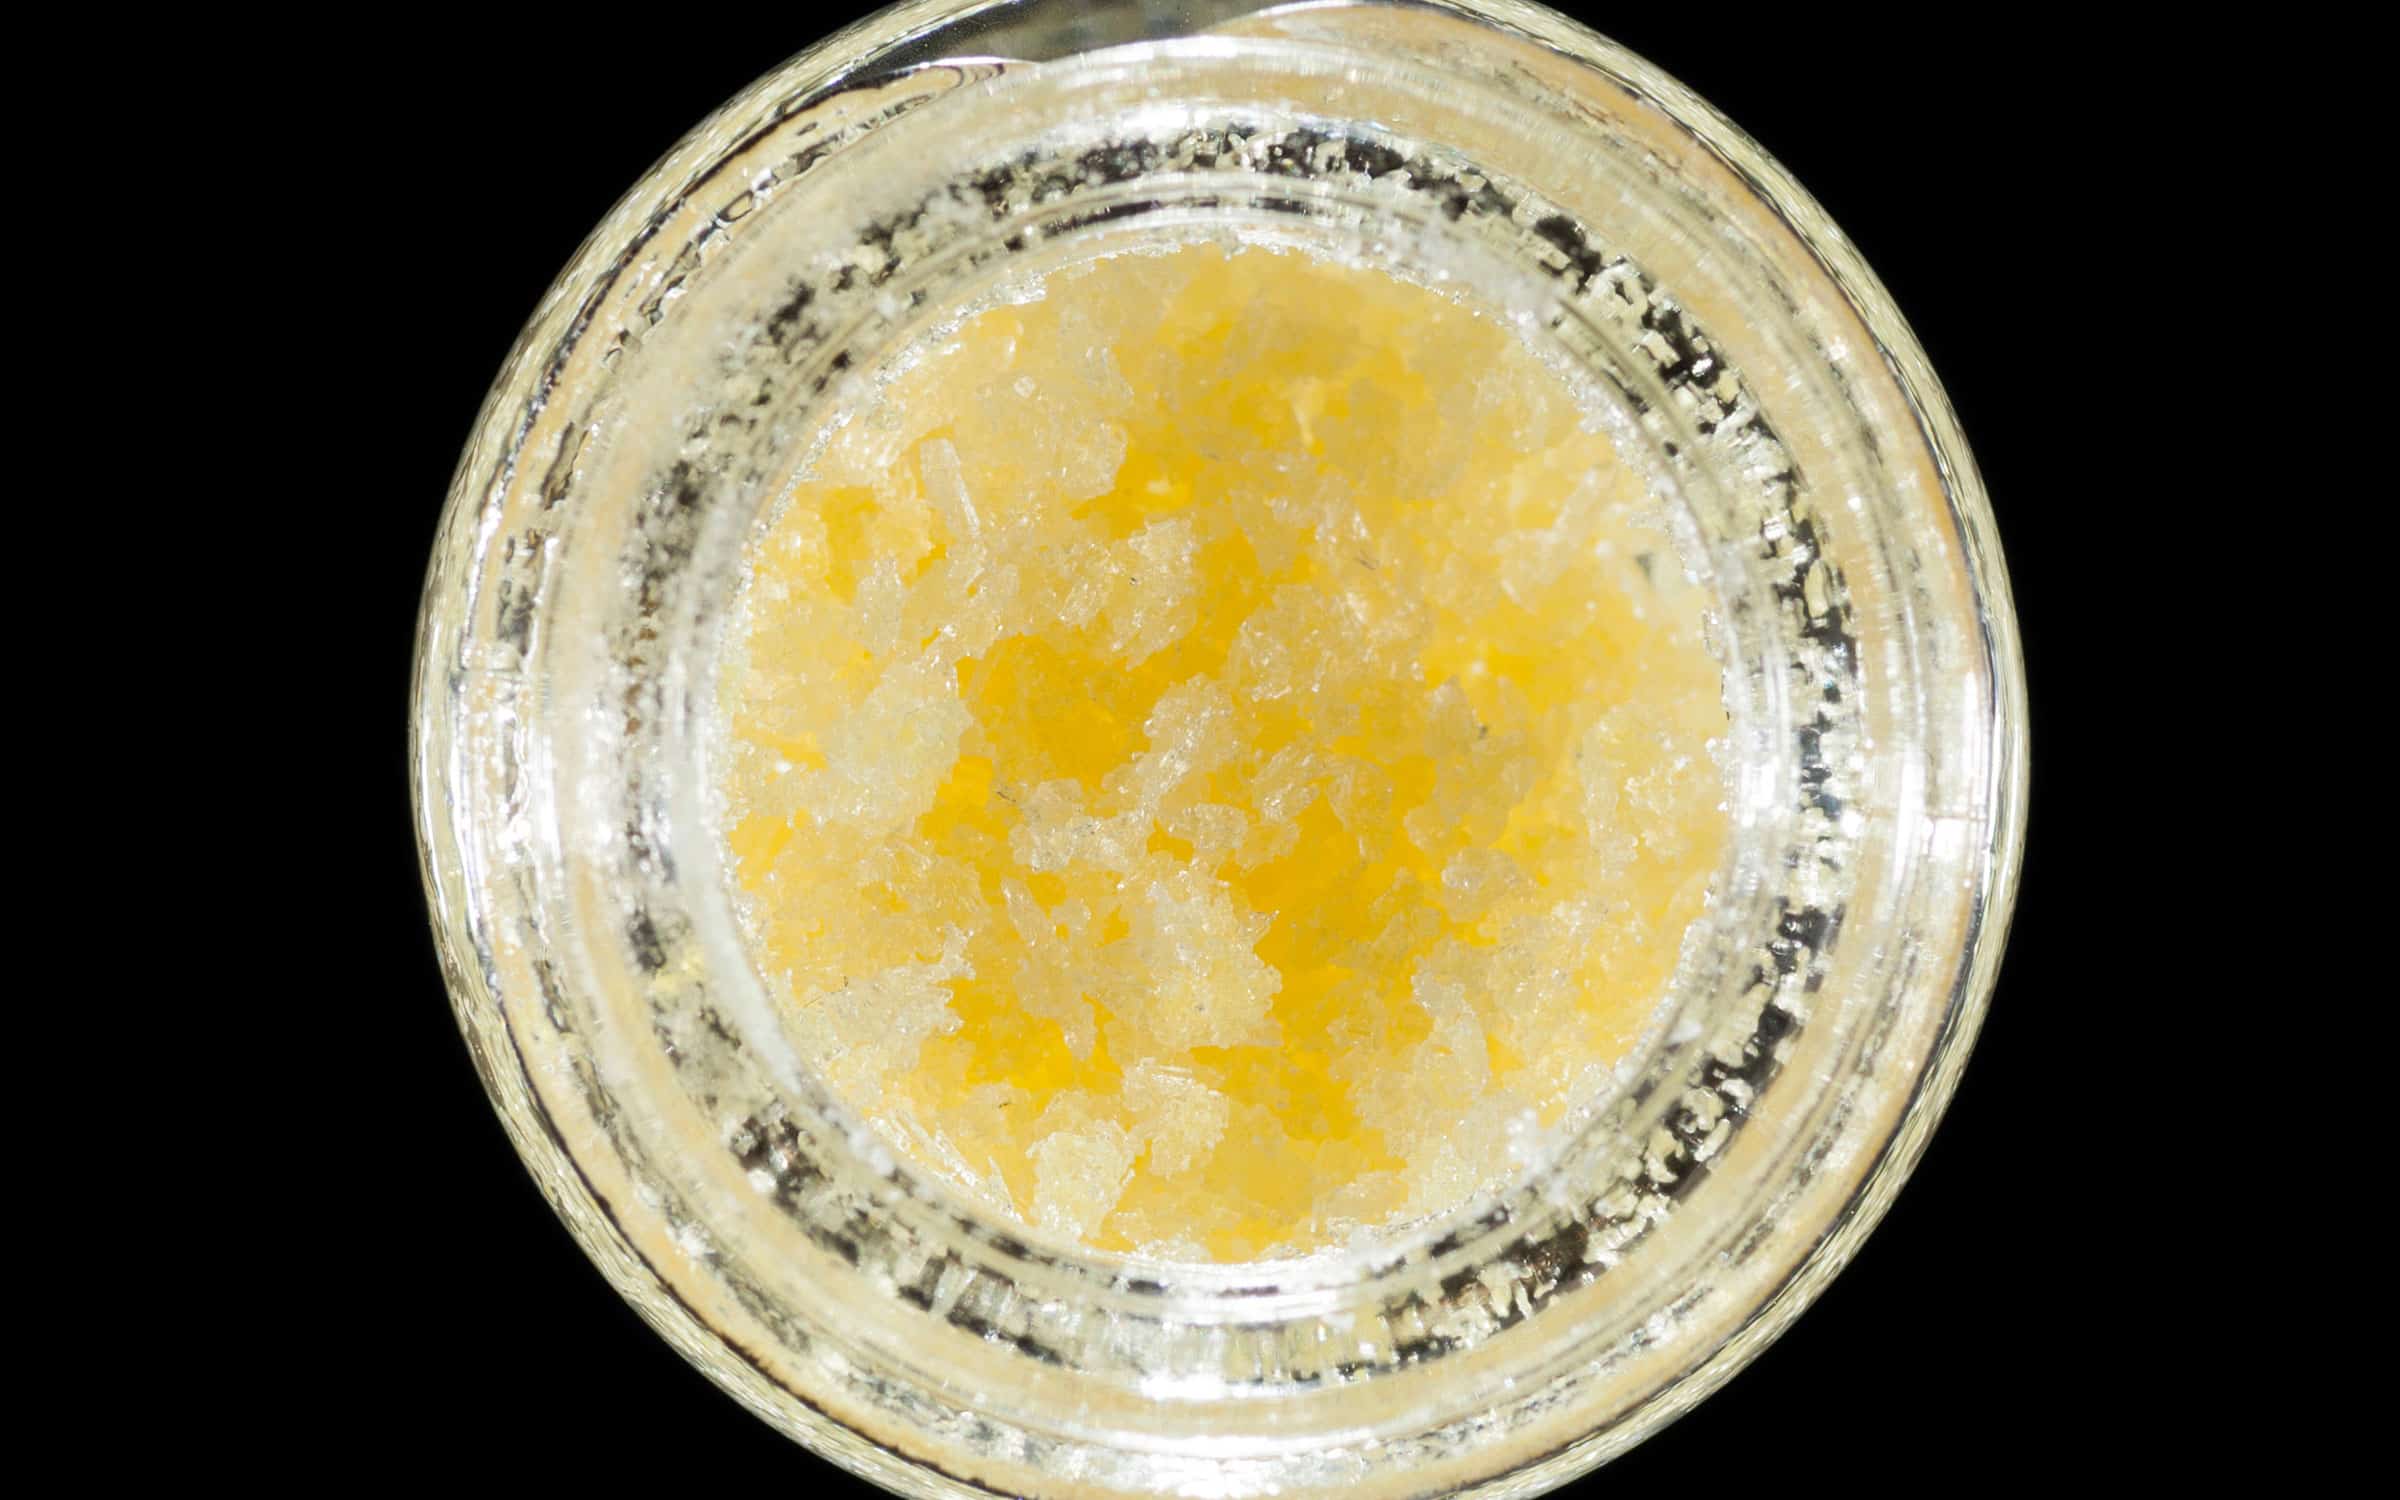 BEST CBD CONCENTRATES ONLINE - Cbd|Concentrates|Products|Concentrate|Hemp|Shatter|Wax|Isolate|Product|Thc|Terpenes|Oil|Effects|Cannabis|Cannabinoids|Spectrum|Plant|Form|Way|Pure|Extract|Powder|Crystals|Dab|Process|Extraction|Flower|People|Benefits|Vape|Body|Experience|Resin|Quality|Waxes|Health|Time|Potency|Amount|Forms|Cbd Concentrates|Cbd Concentrate|Cbd Wax|Cbd Shatter|Cbd Products|Cbd Isolate|Dab Rig|Cannabis Plant|Live Resin|Hemp Plant|Cbd Waxes|Free Shipping|Cbd Oil|Cbd Crystals|Tweedle Farms|Cbd Dabs|Full Spectrum Cbd|Dab Pen|Extraction Process|Daily Basis|Cbd Isolates|Entourage Effect|Scientific Hemp Oil®|Blue Moon Hemp|Cbd Oil Solutions|Pure Cbd Isolate|Pure Cbd|Small Amount|United States|Cbd Flower